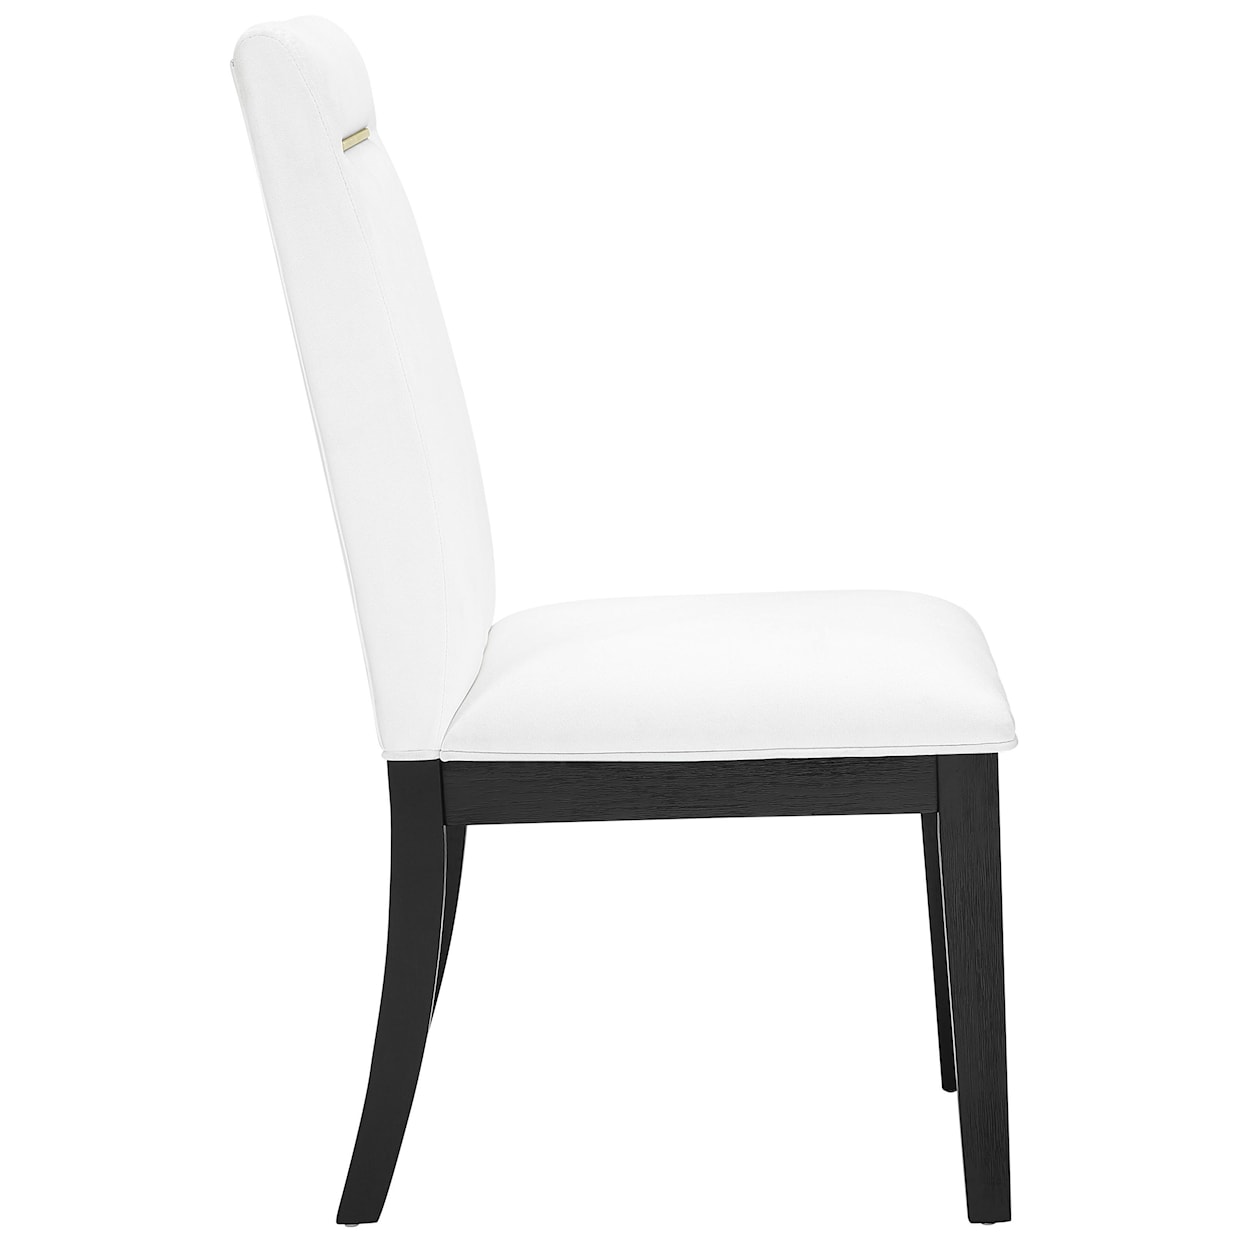 Prime Yves Side Chair